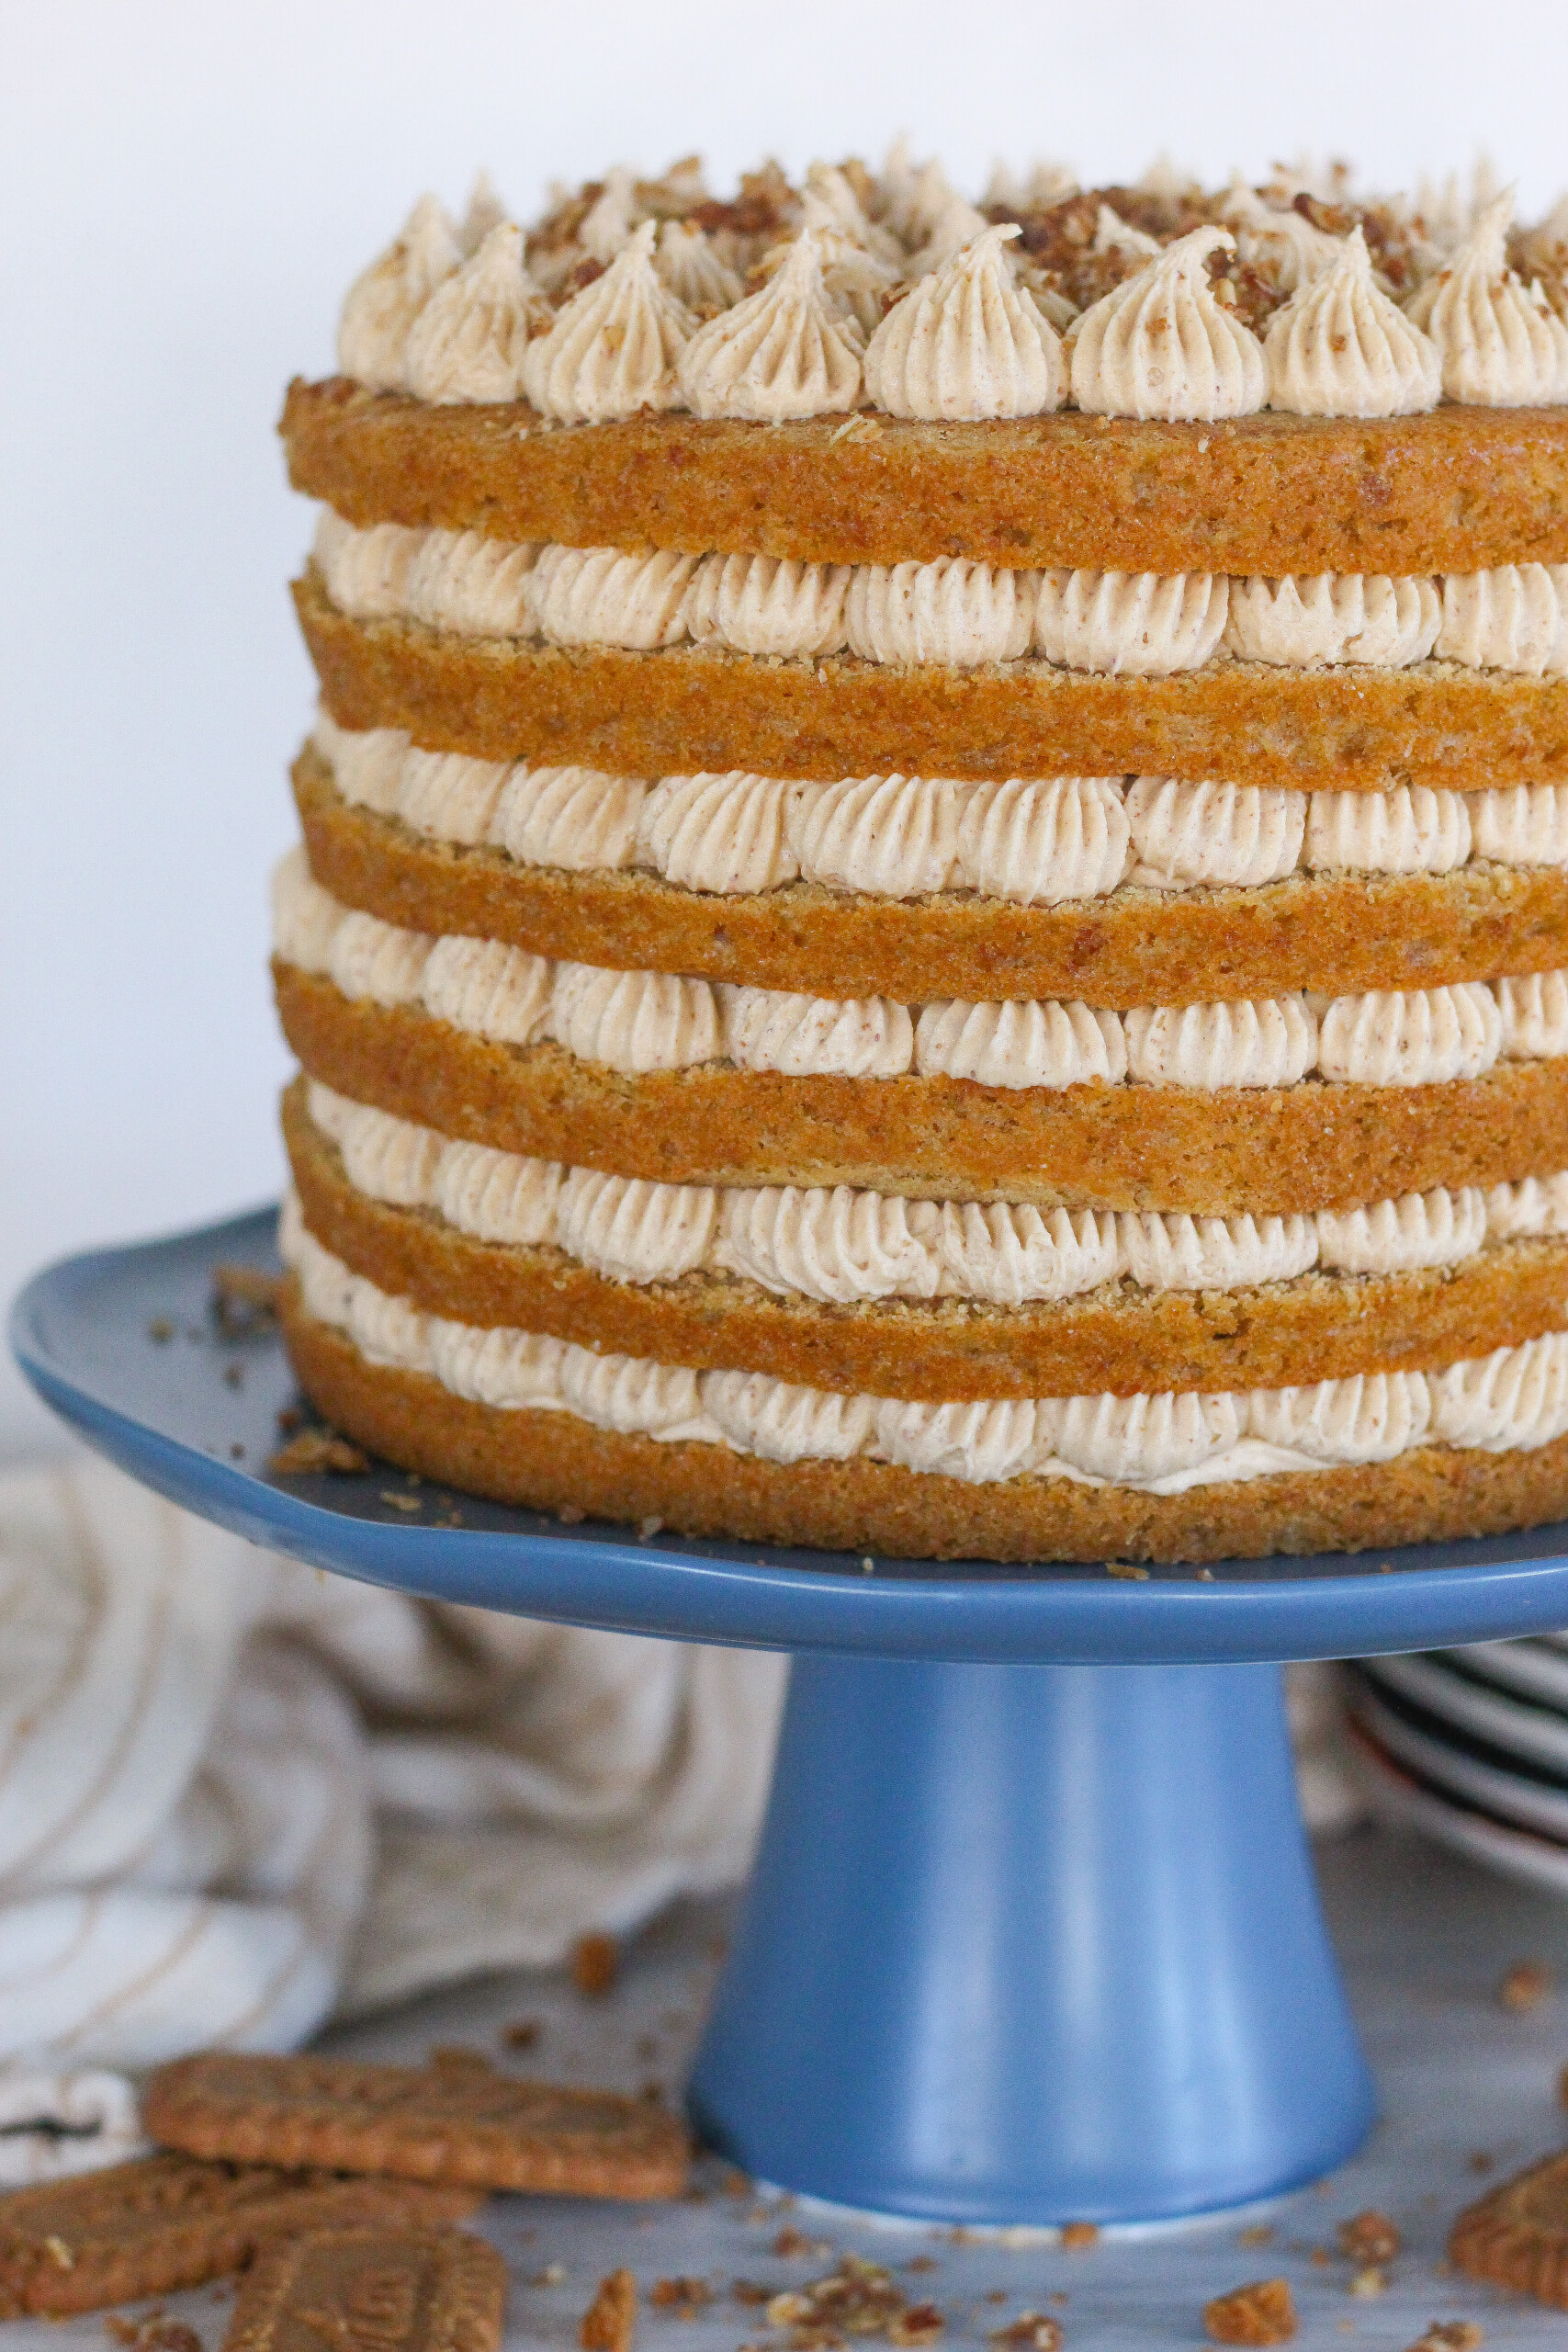 Six layer cake on a blue cake stand with cookies.